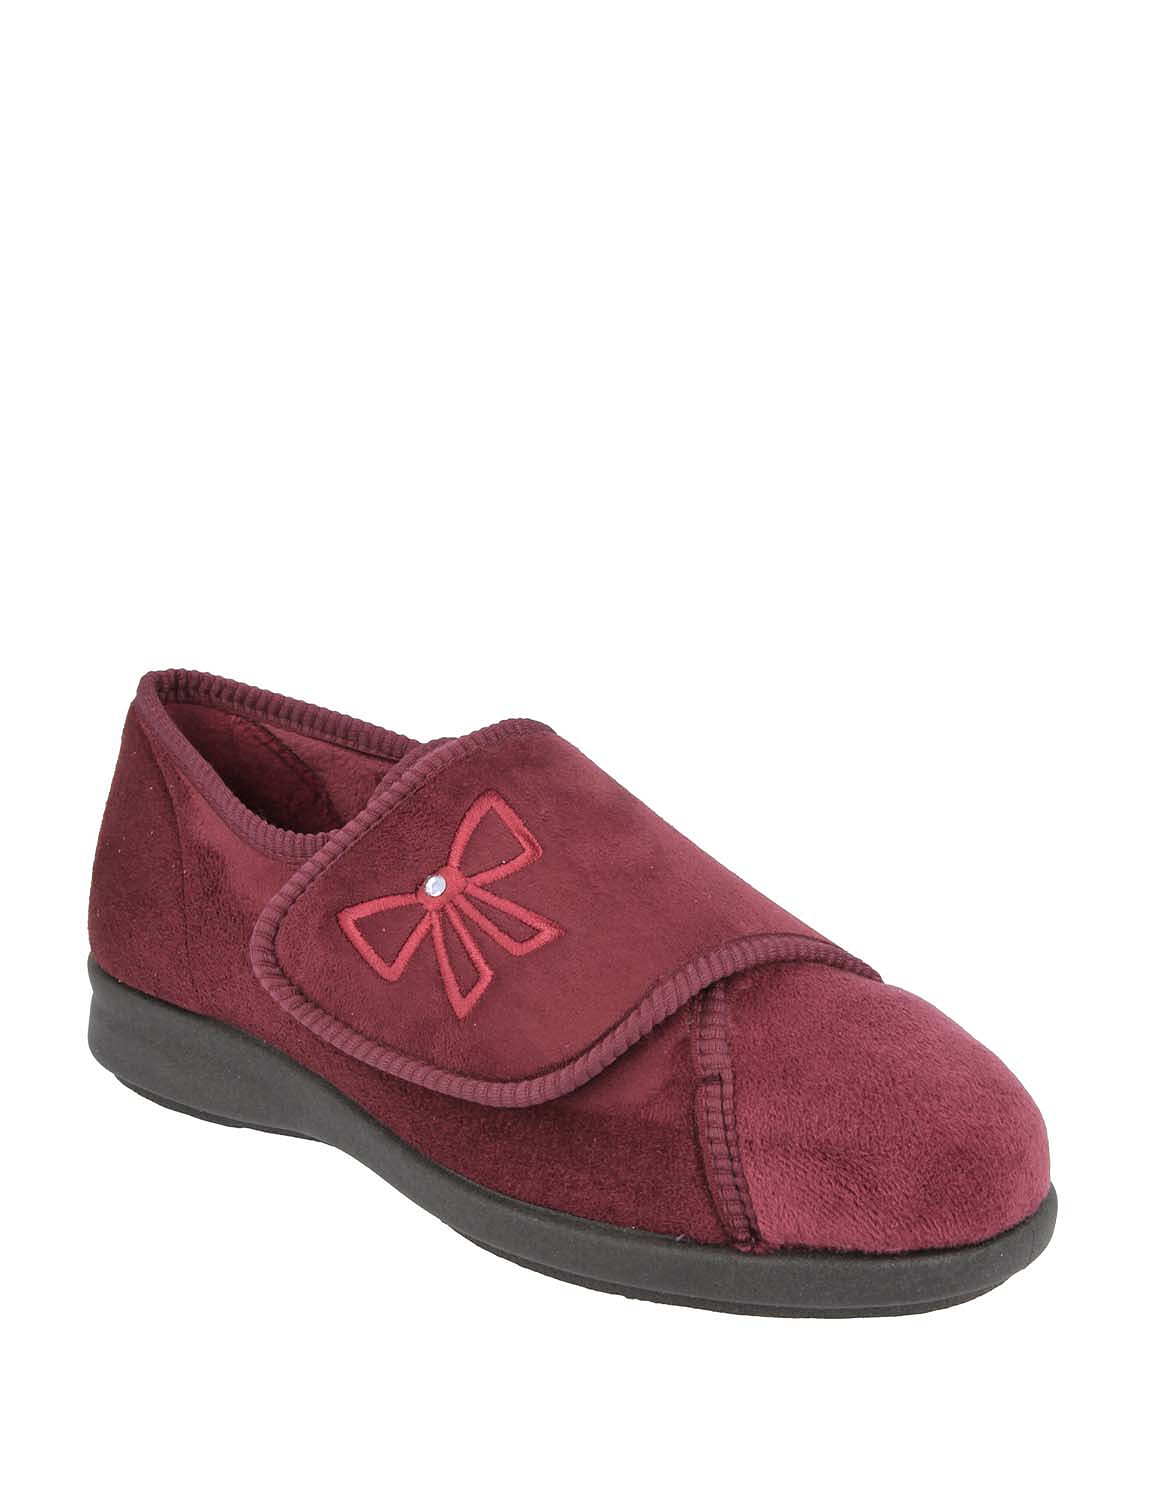 DB Shoes Ladies Keeston Wide Fit EE-4E Slipper | Chums